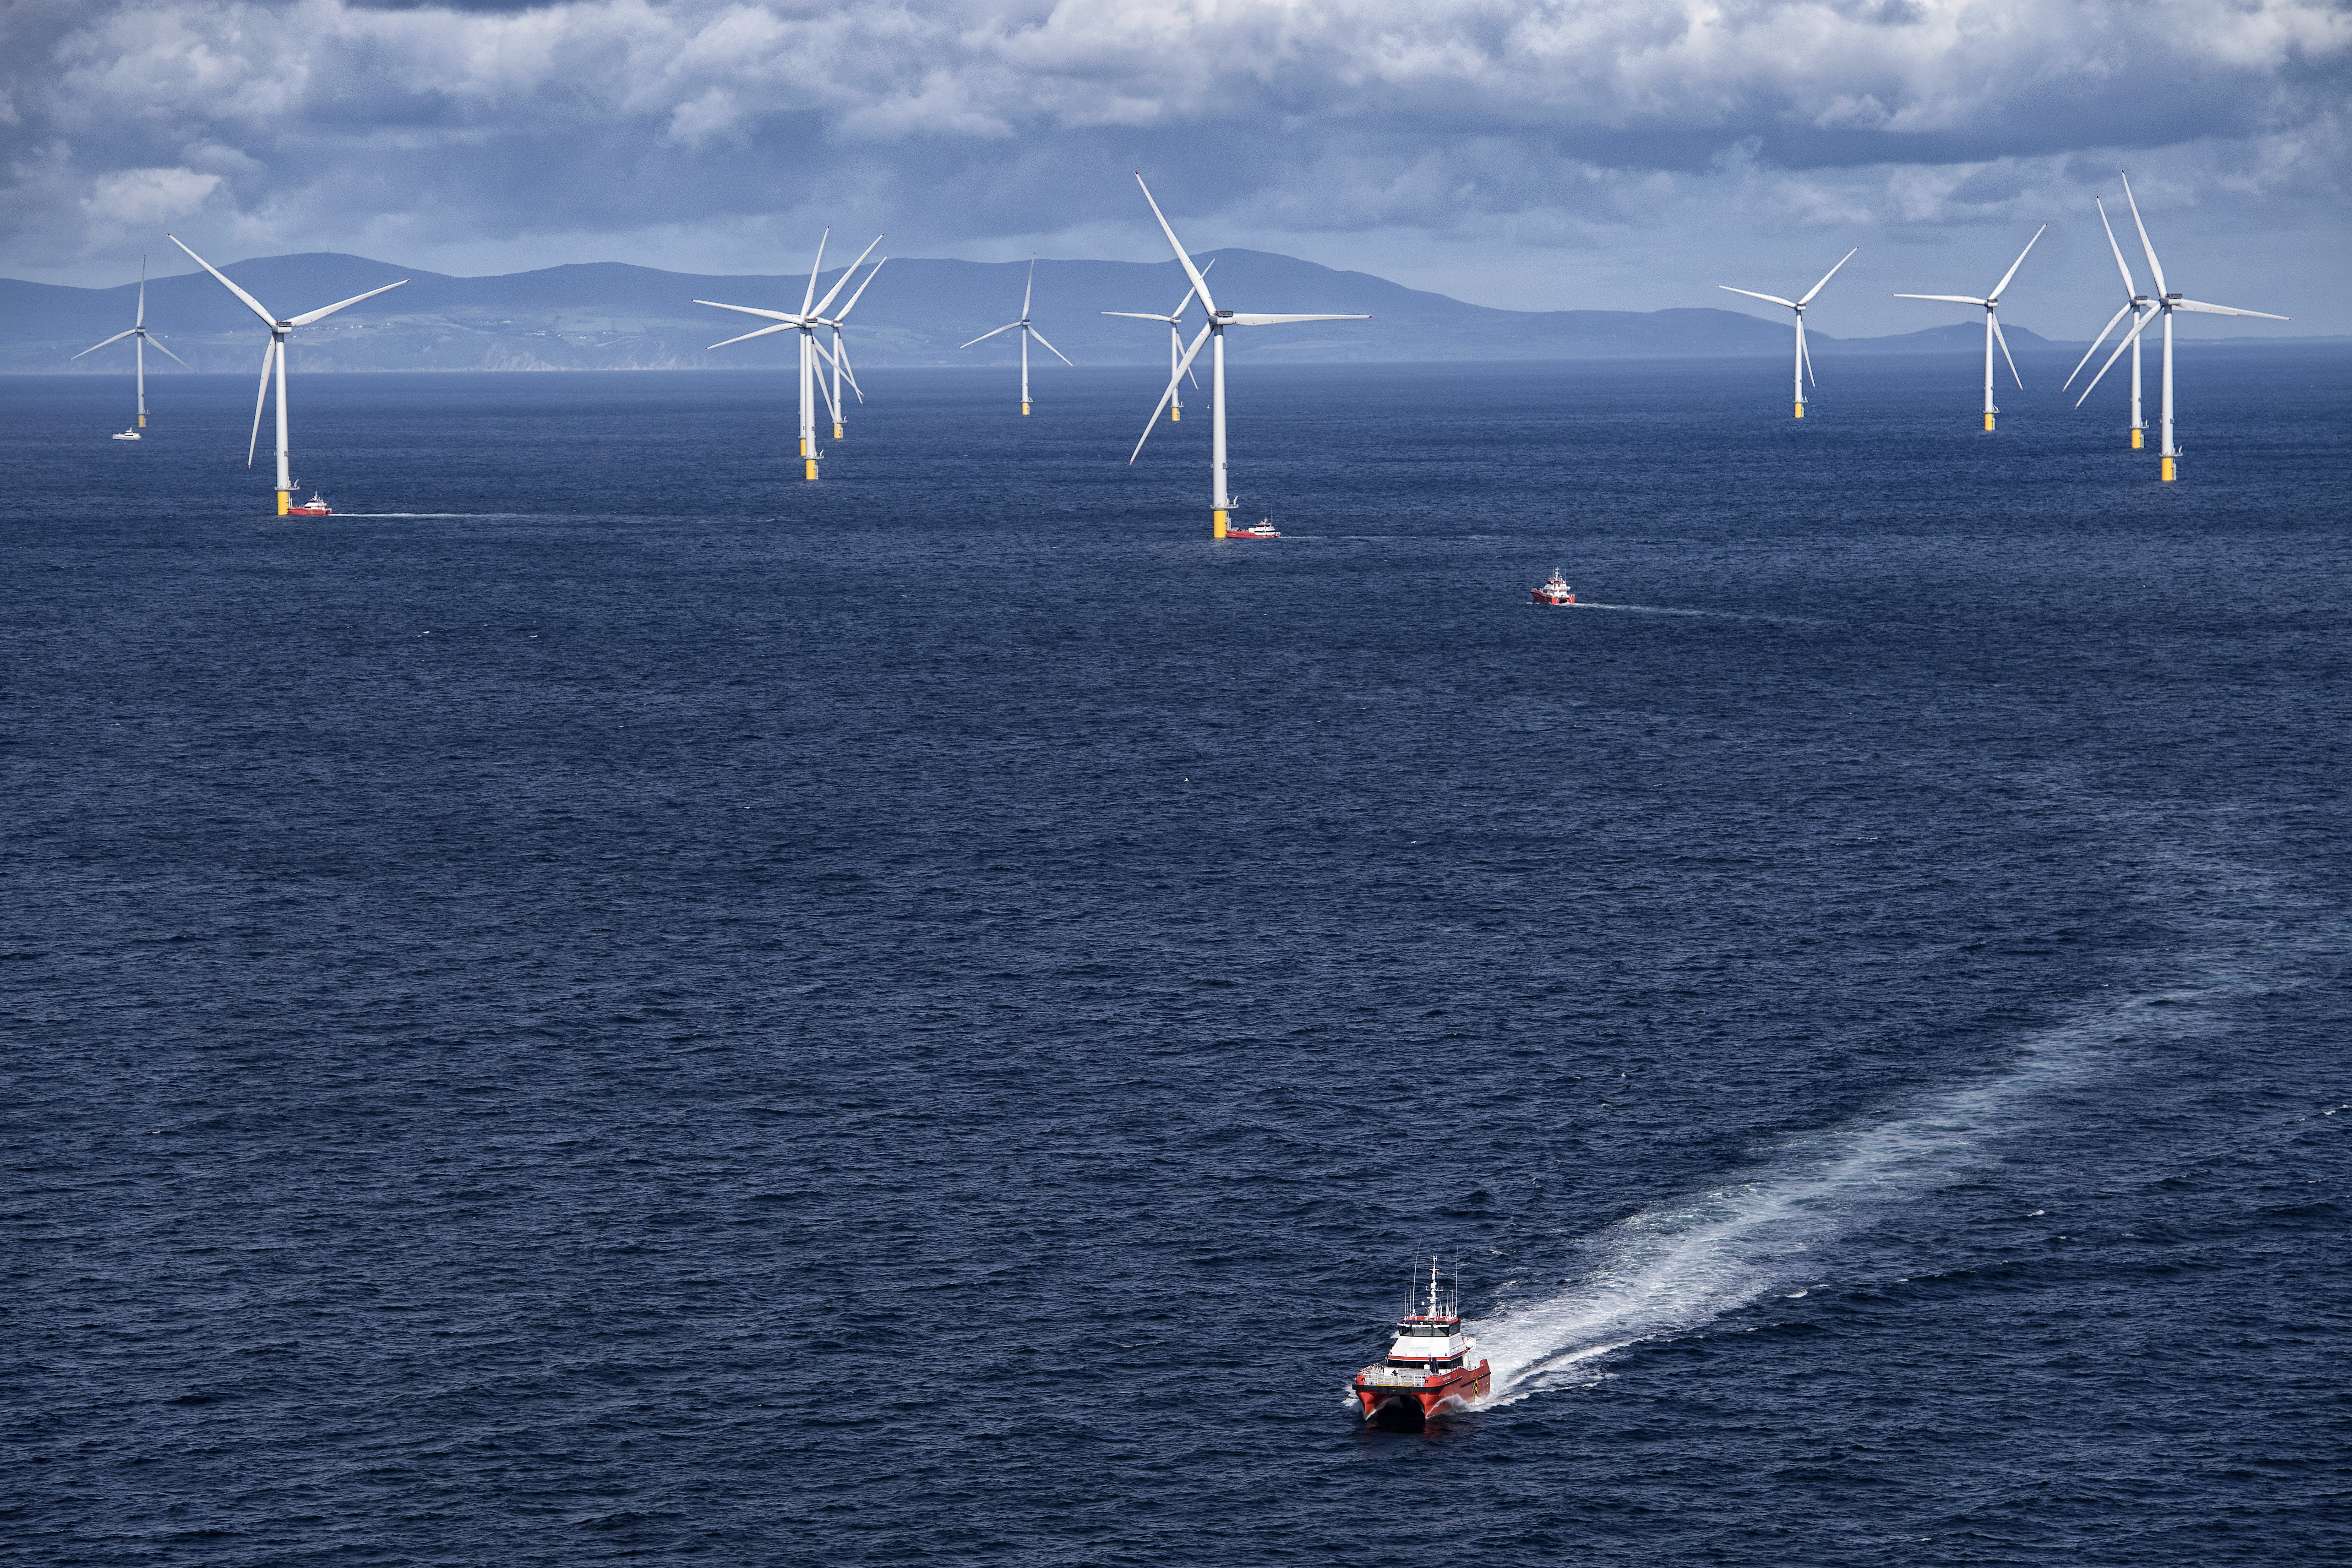 Orlen secures grid connection agreement for its offshore wind farm - MarinePoland.com